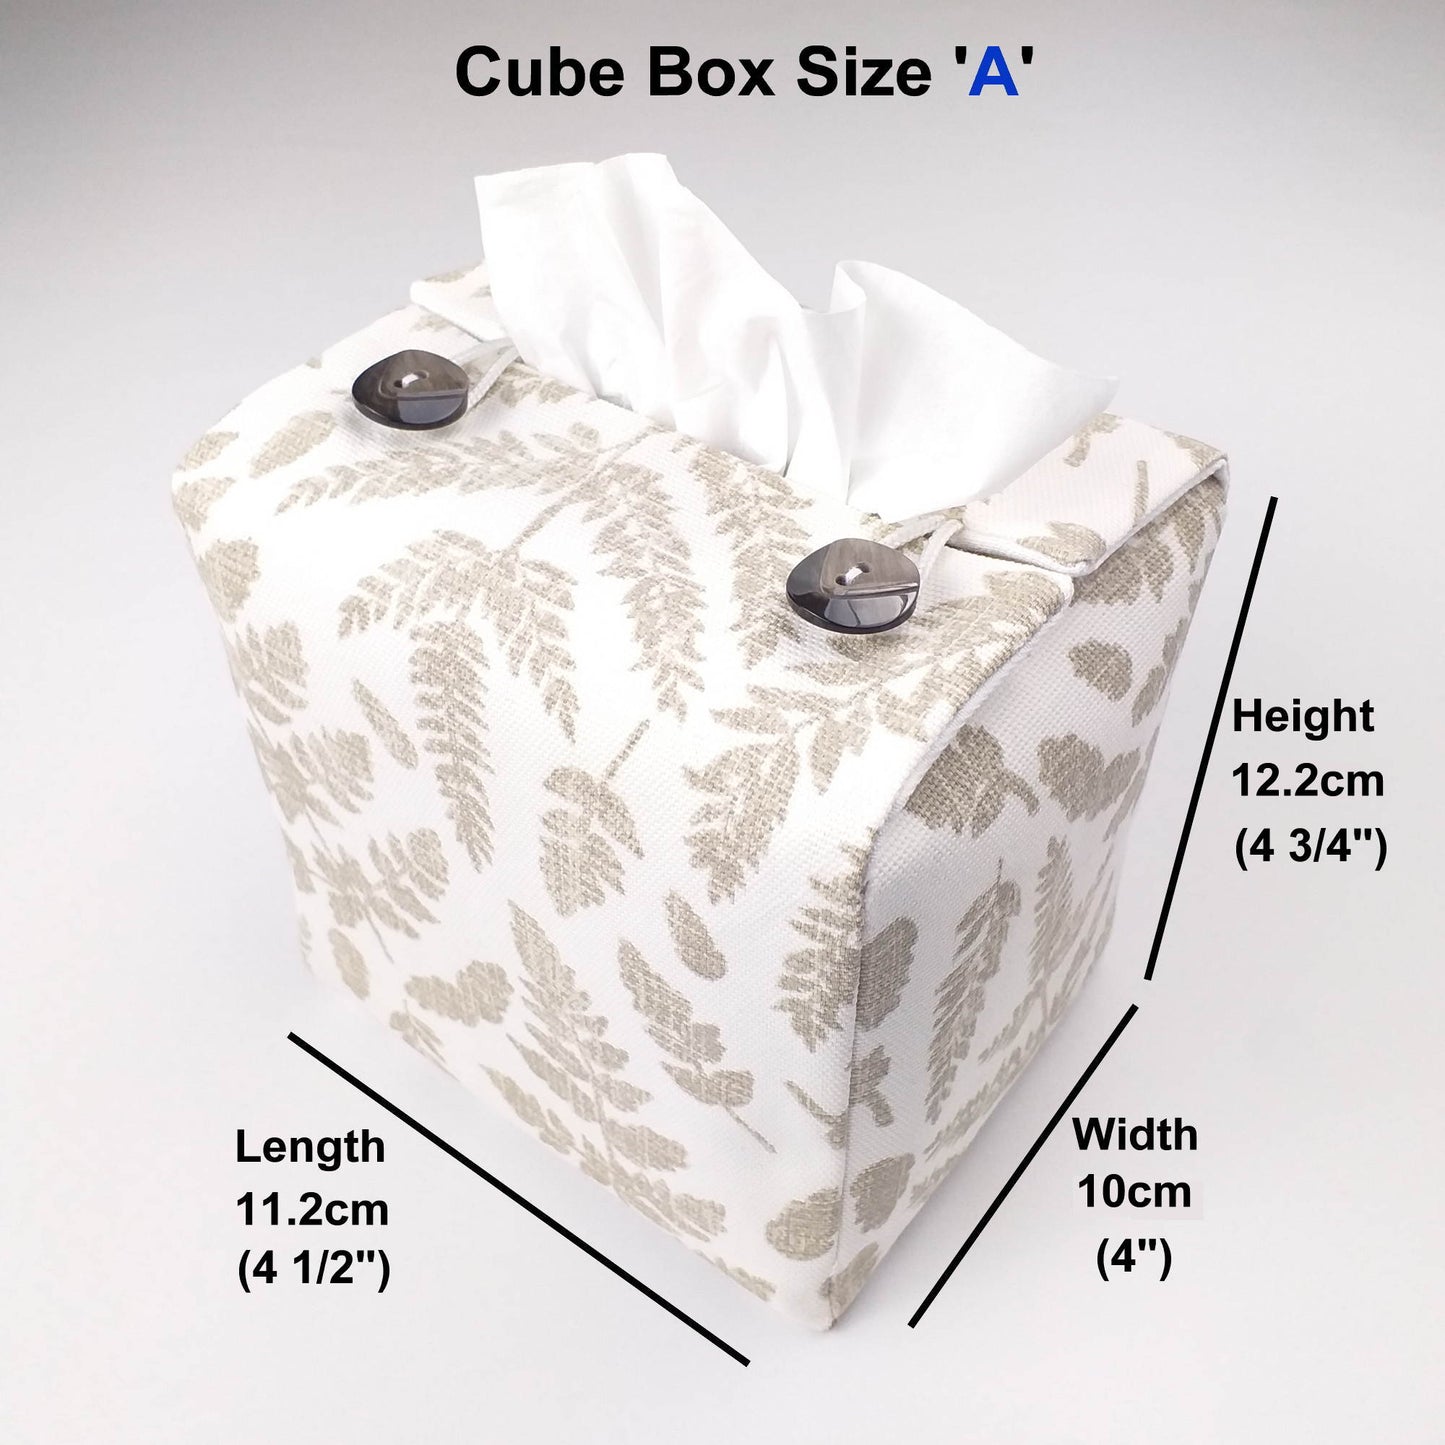 Square tissue box cover with natural fern pattern on off white background